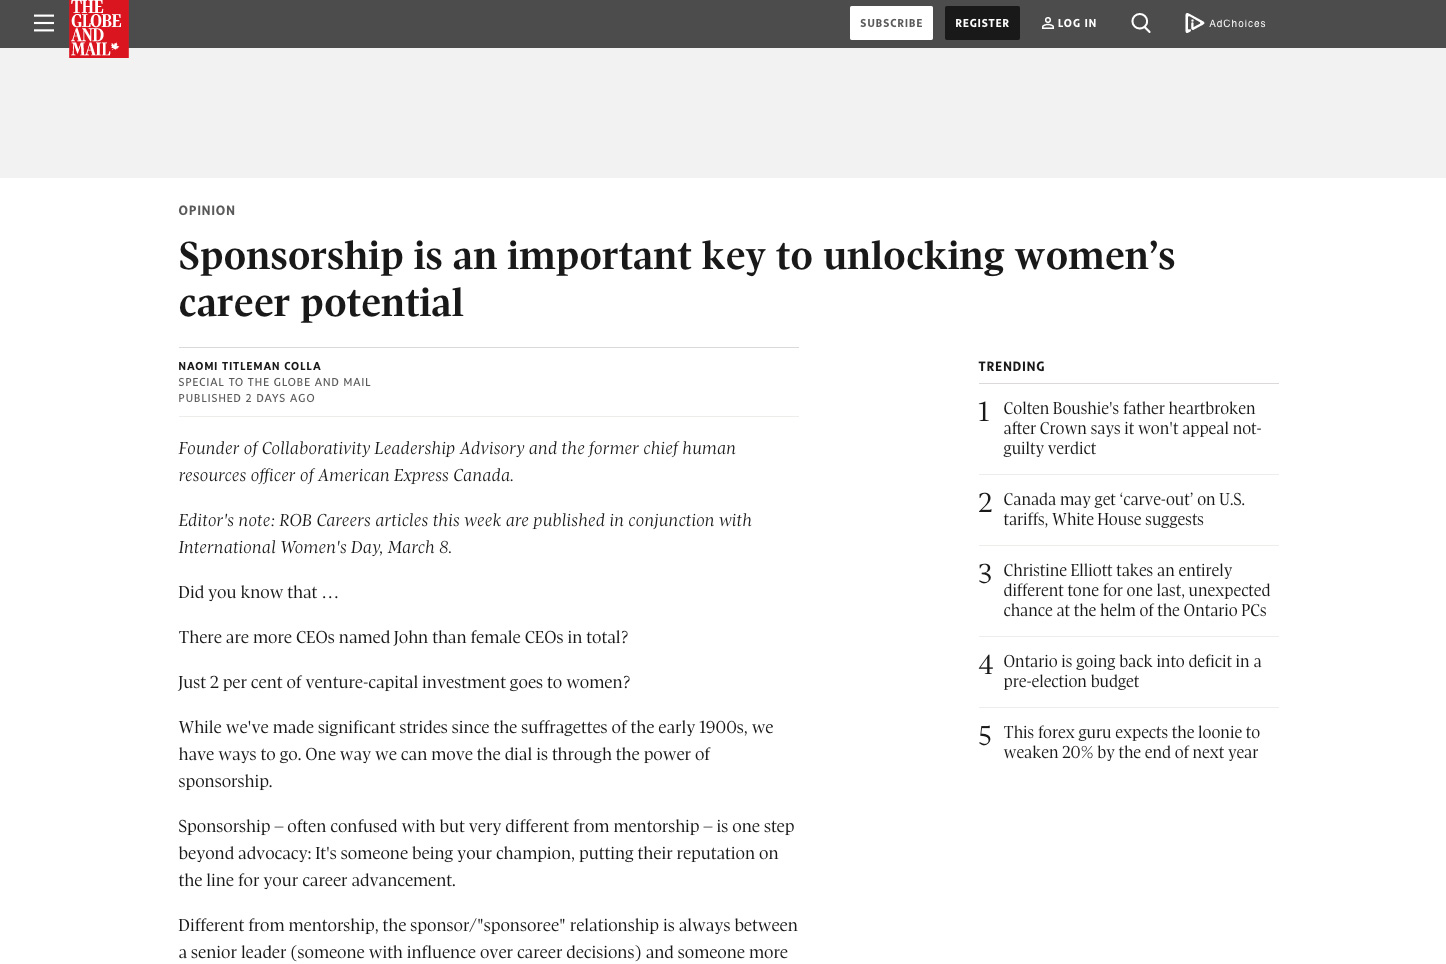 Sponsorship is an important key to unlocking women’s career potential